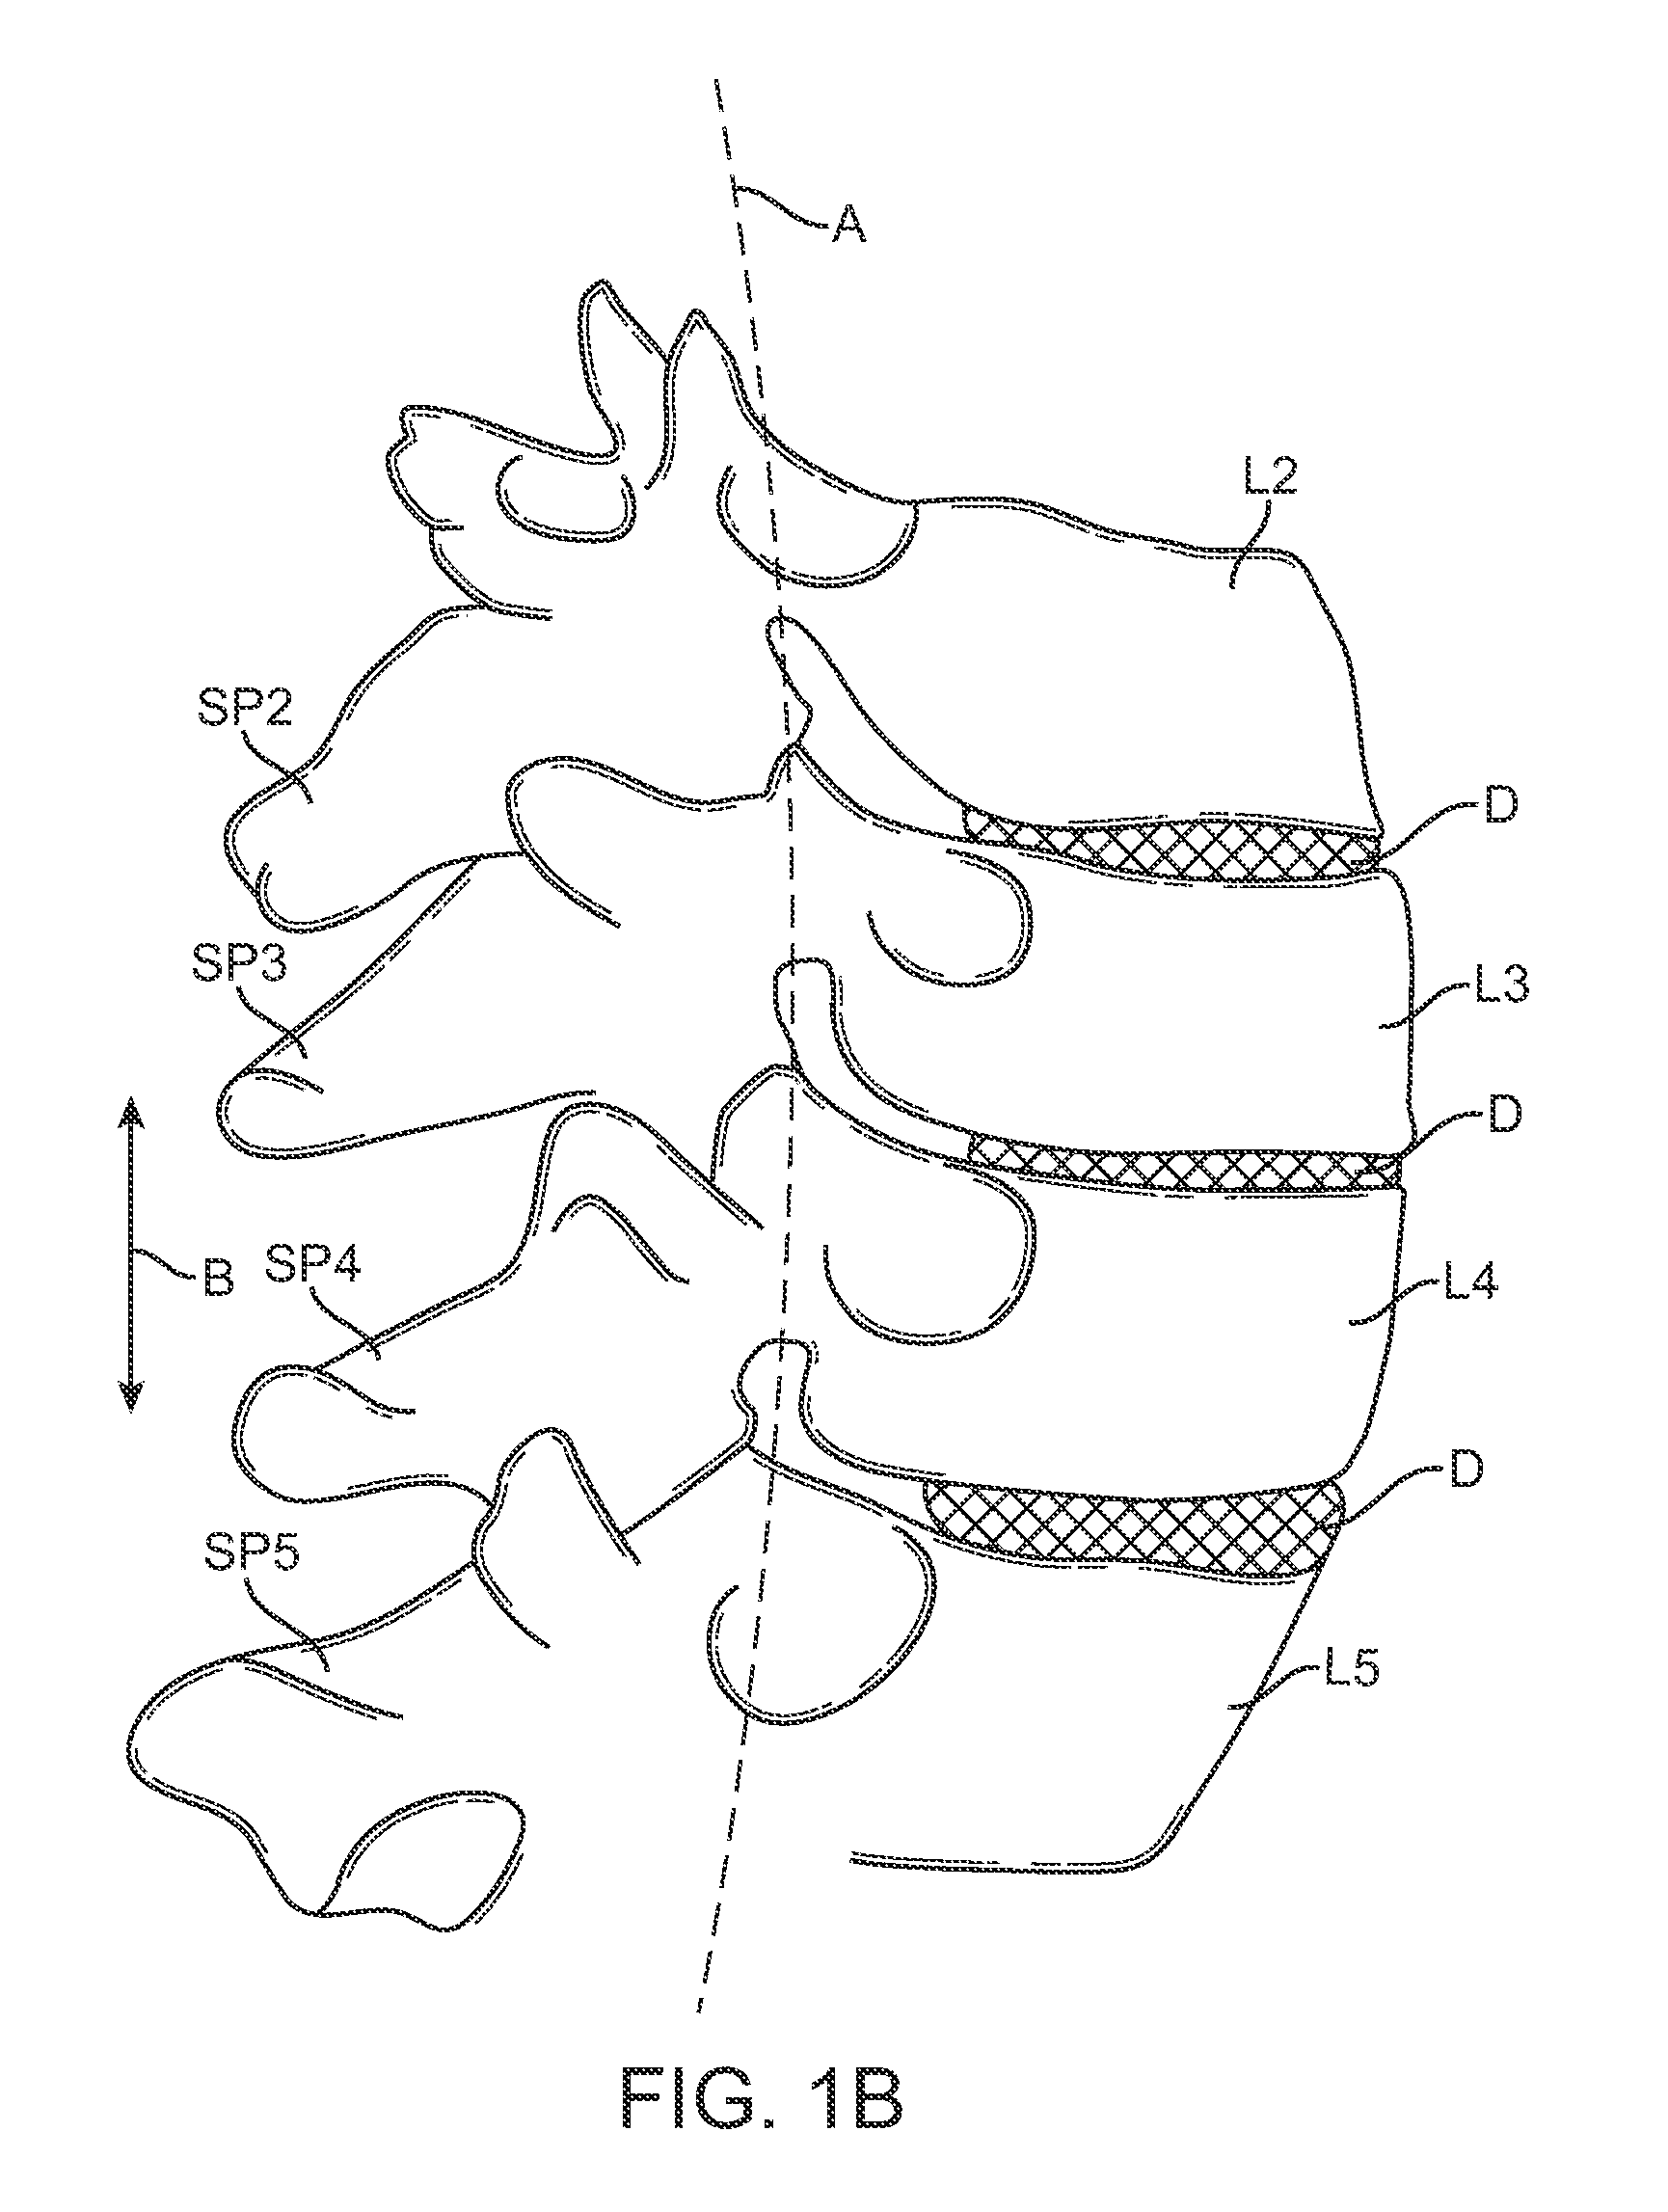 Methods and devices for restricting flexion and extension of a spinal segment